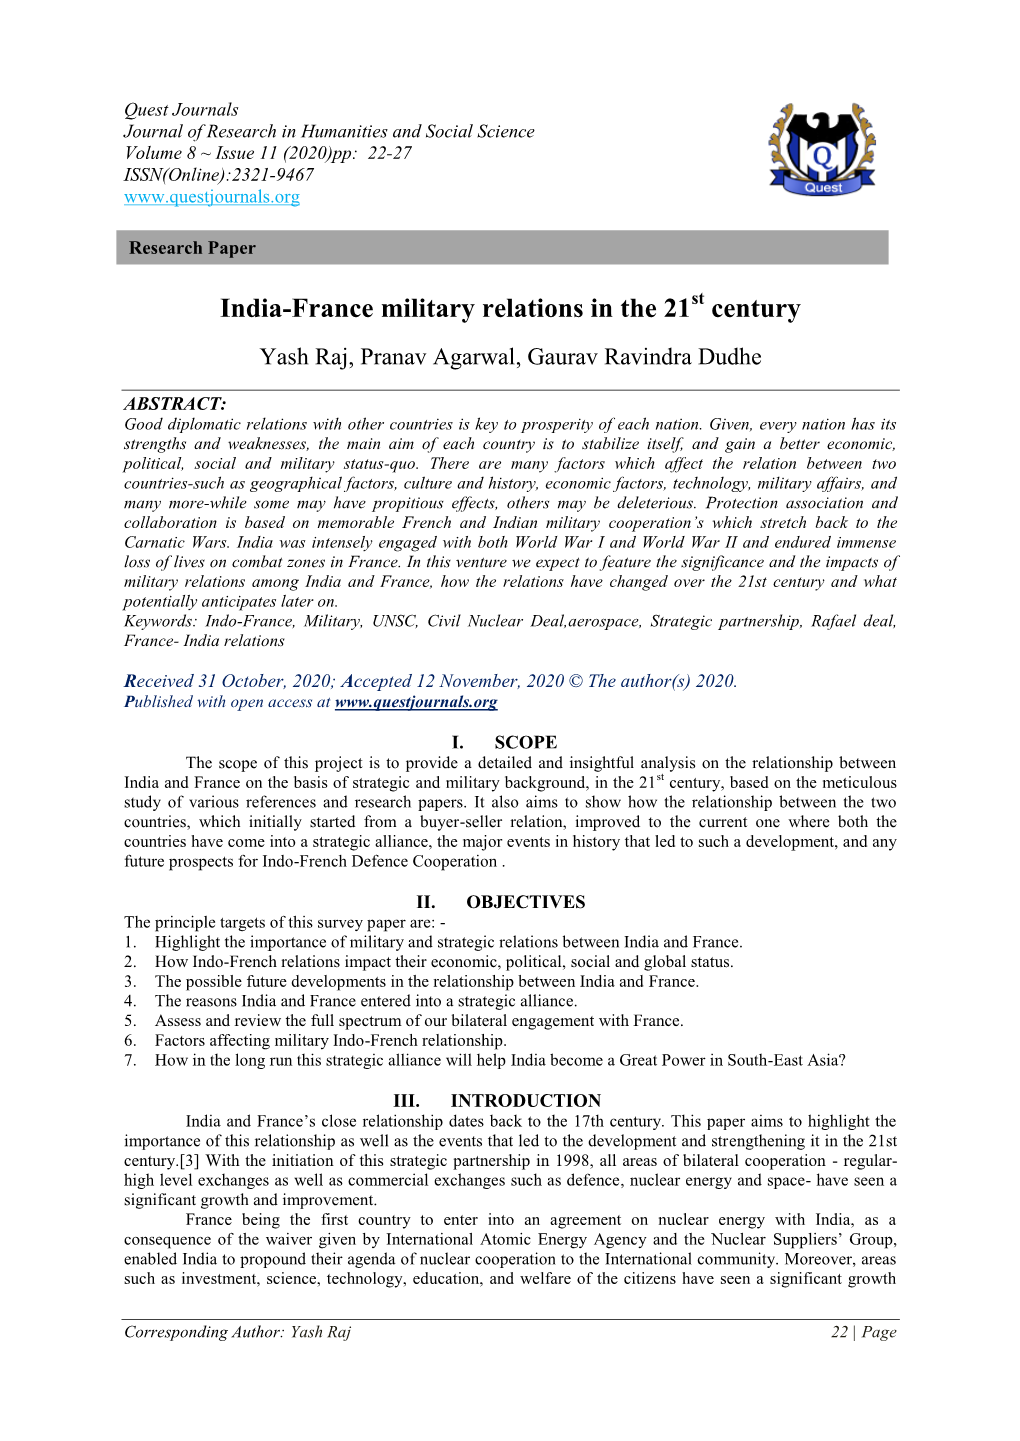 India-France Military Relations in the 21 Century